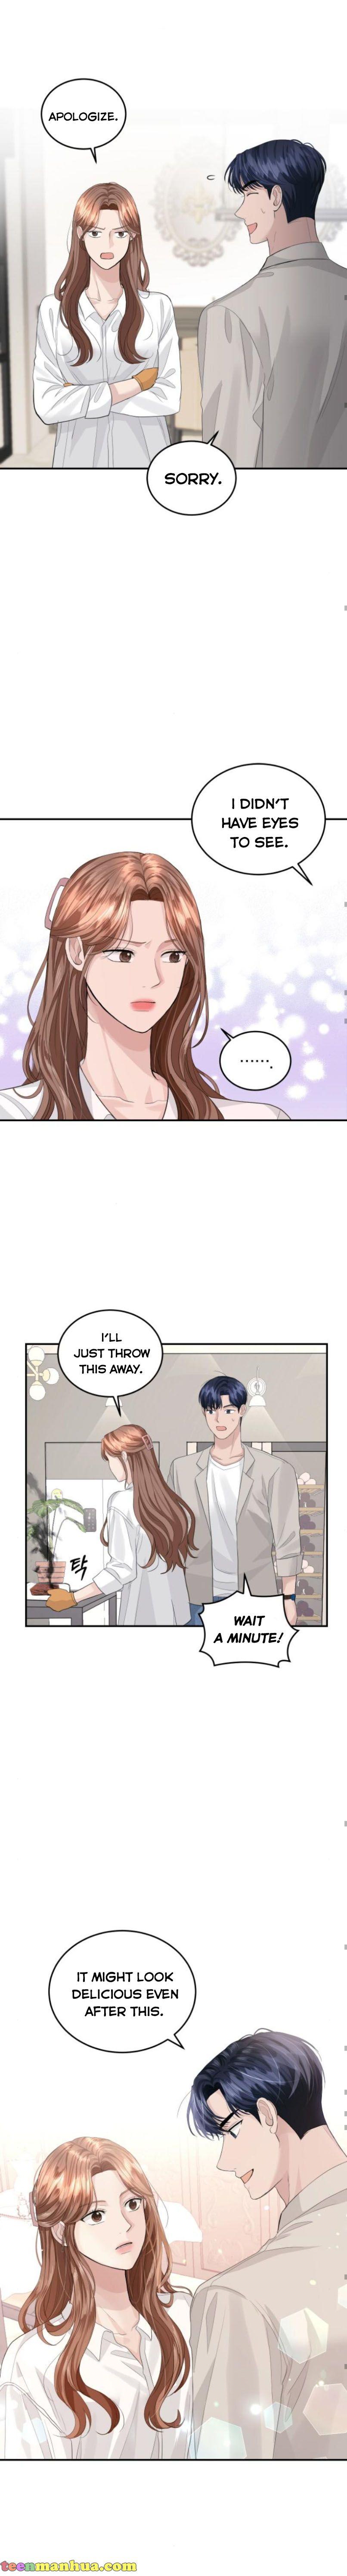 The Essence Of A Perfect Marriage Chapter 32 page 3 - Mangakakalot